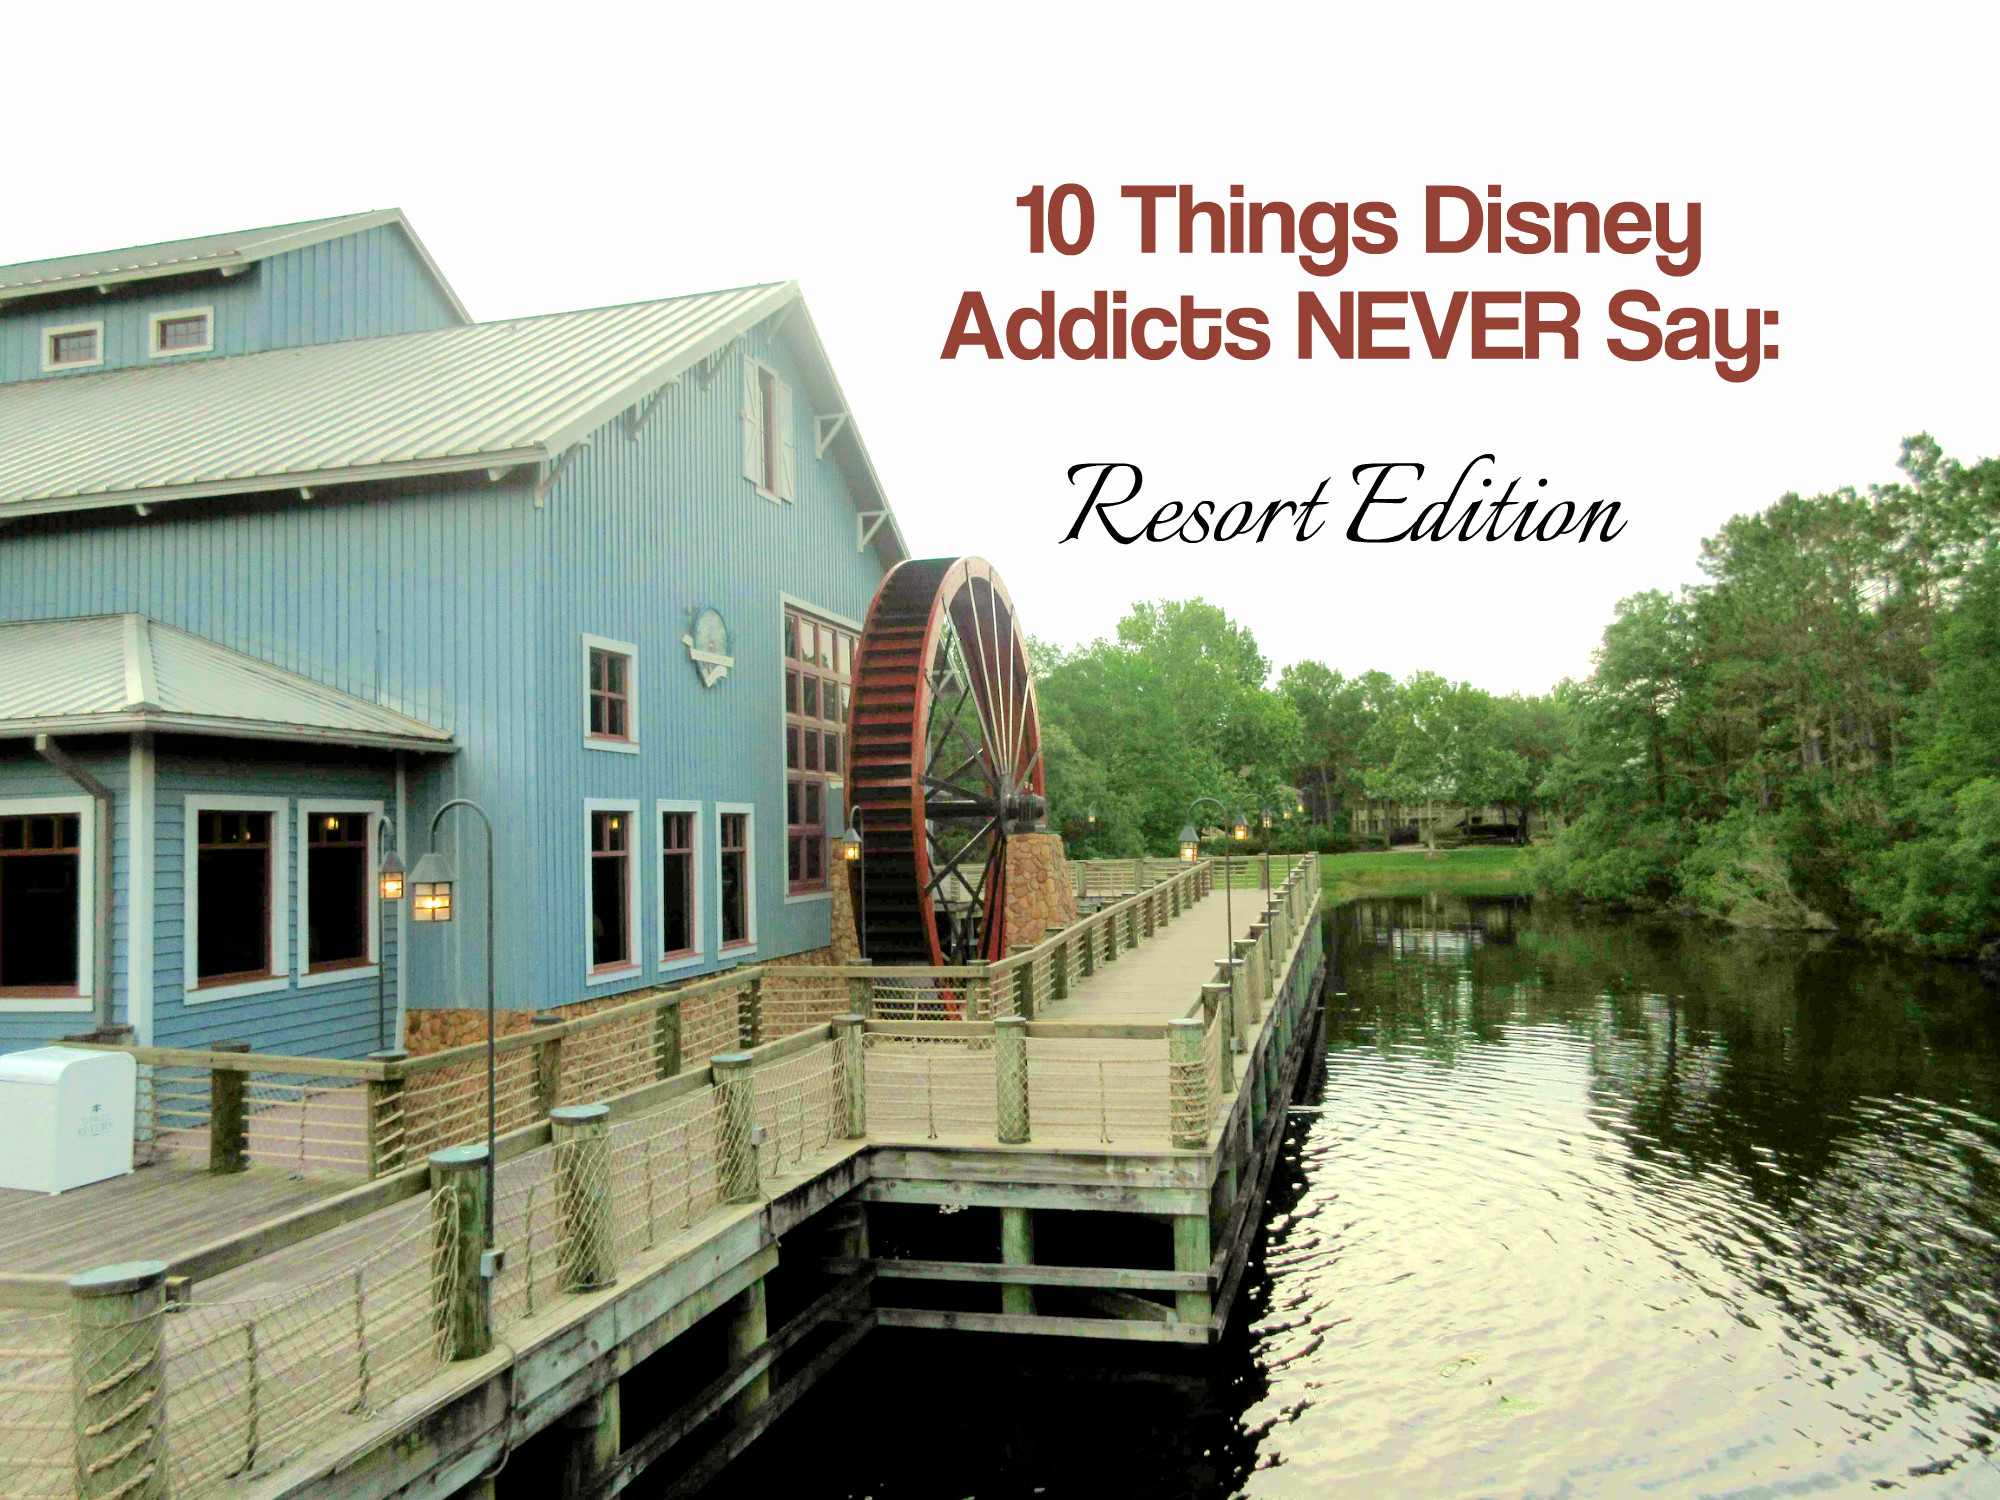 Top 10 Things Disney Addicts NEVER Say: Resort Edition